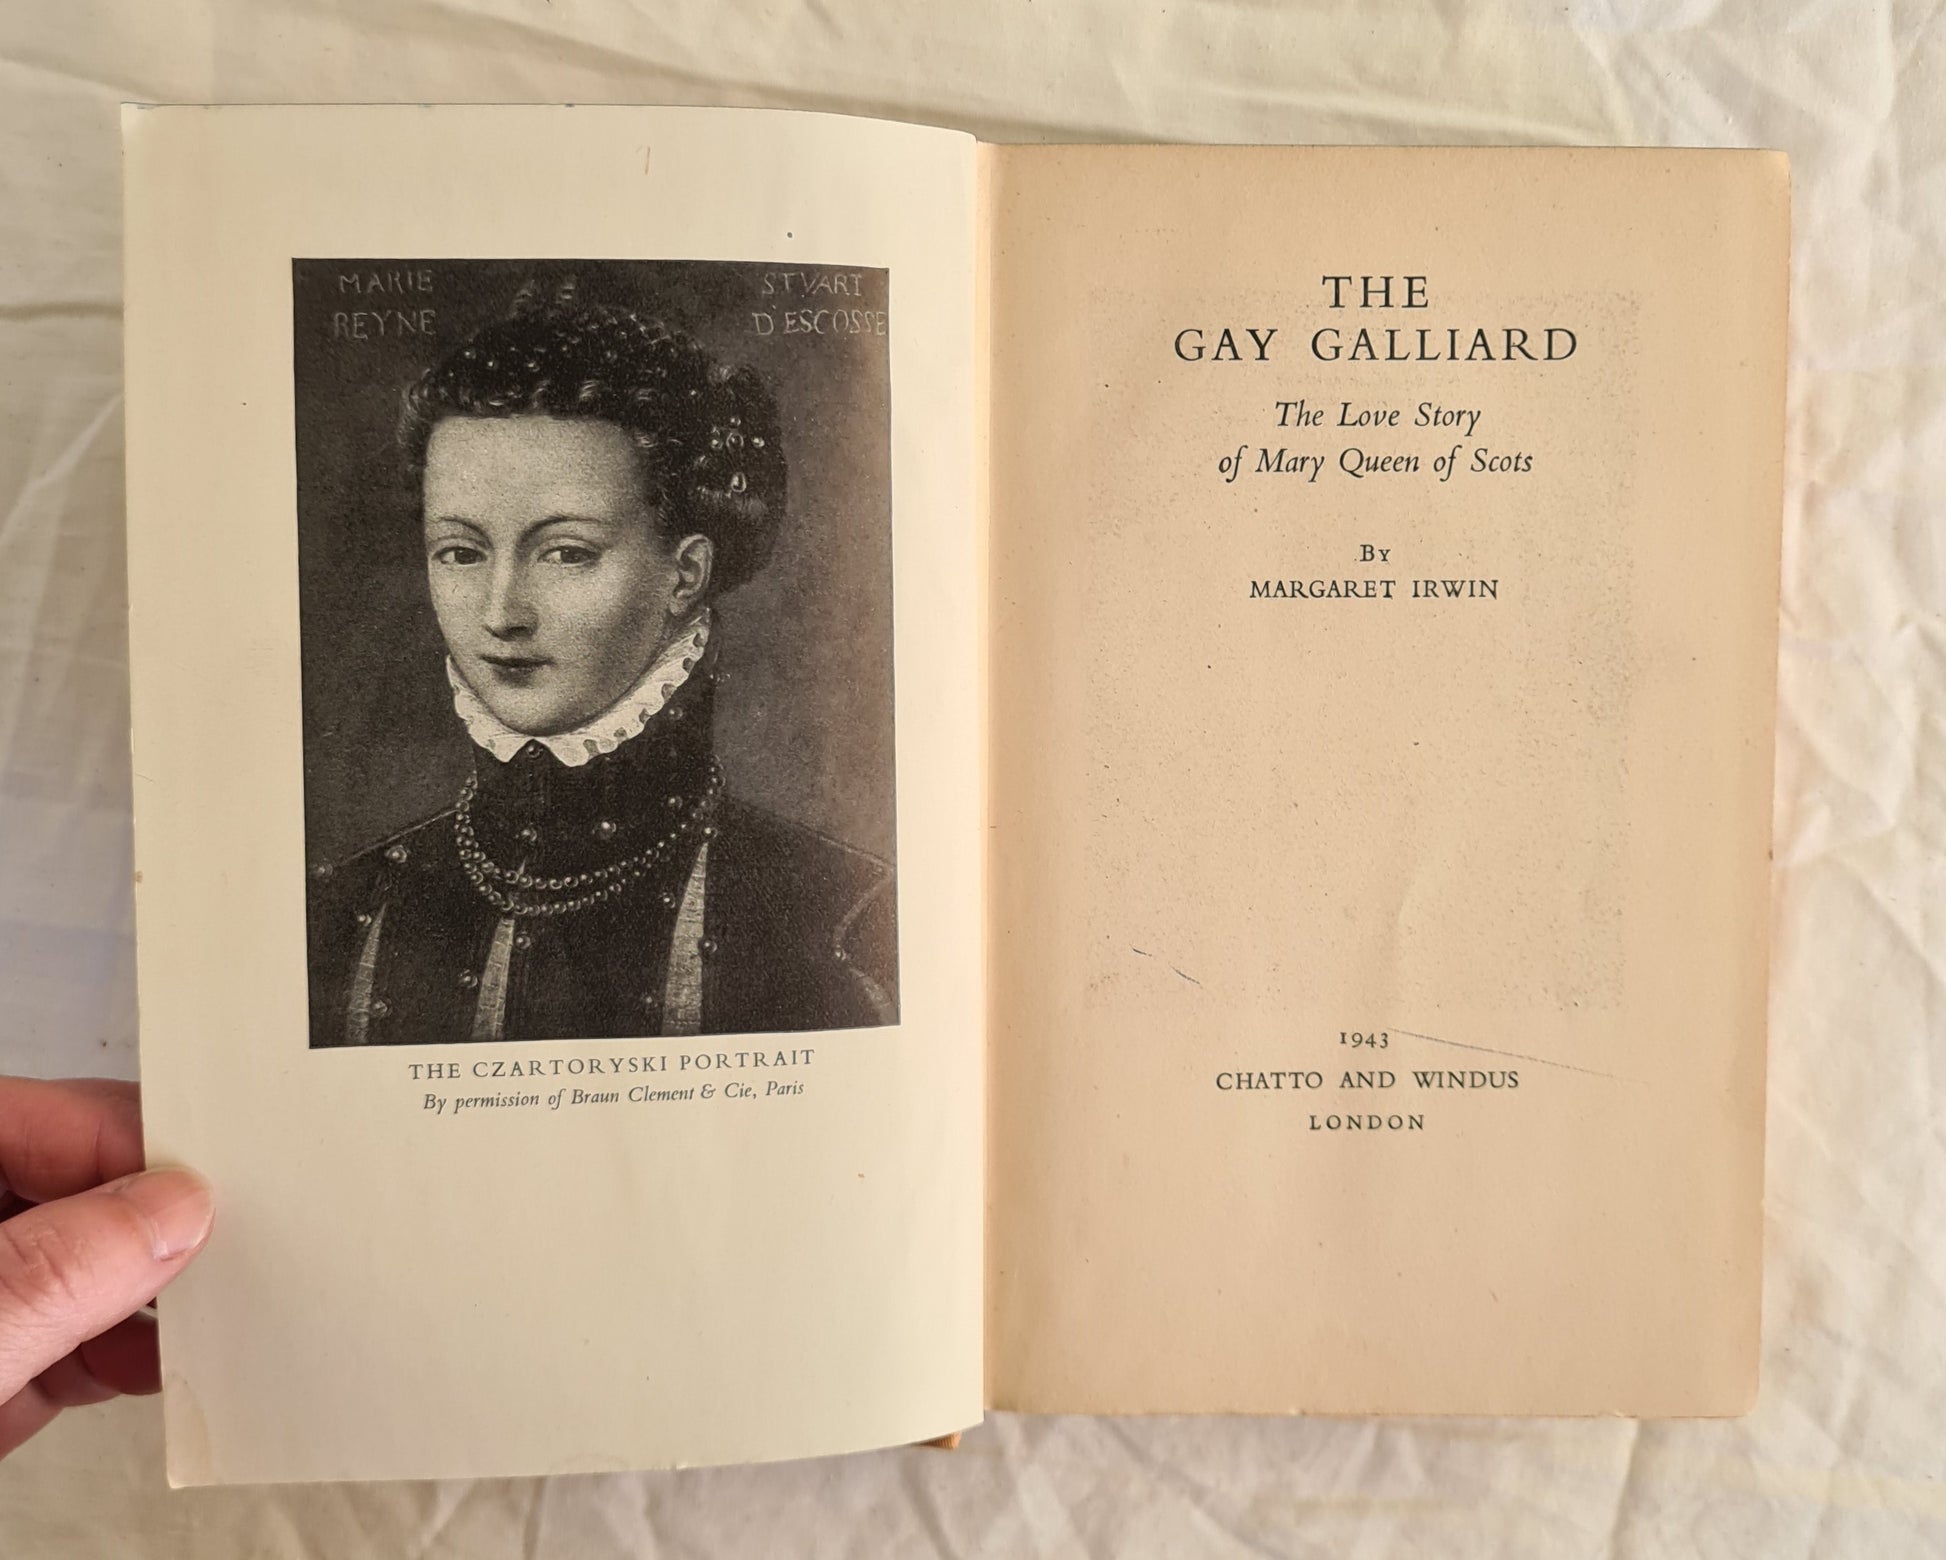 The Gay Galliard  The Love Story of Mary Queen of Scots  by Margaret Irwin